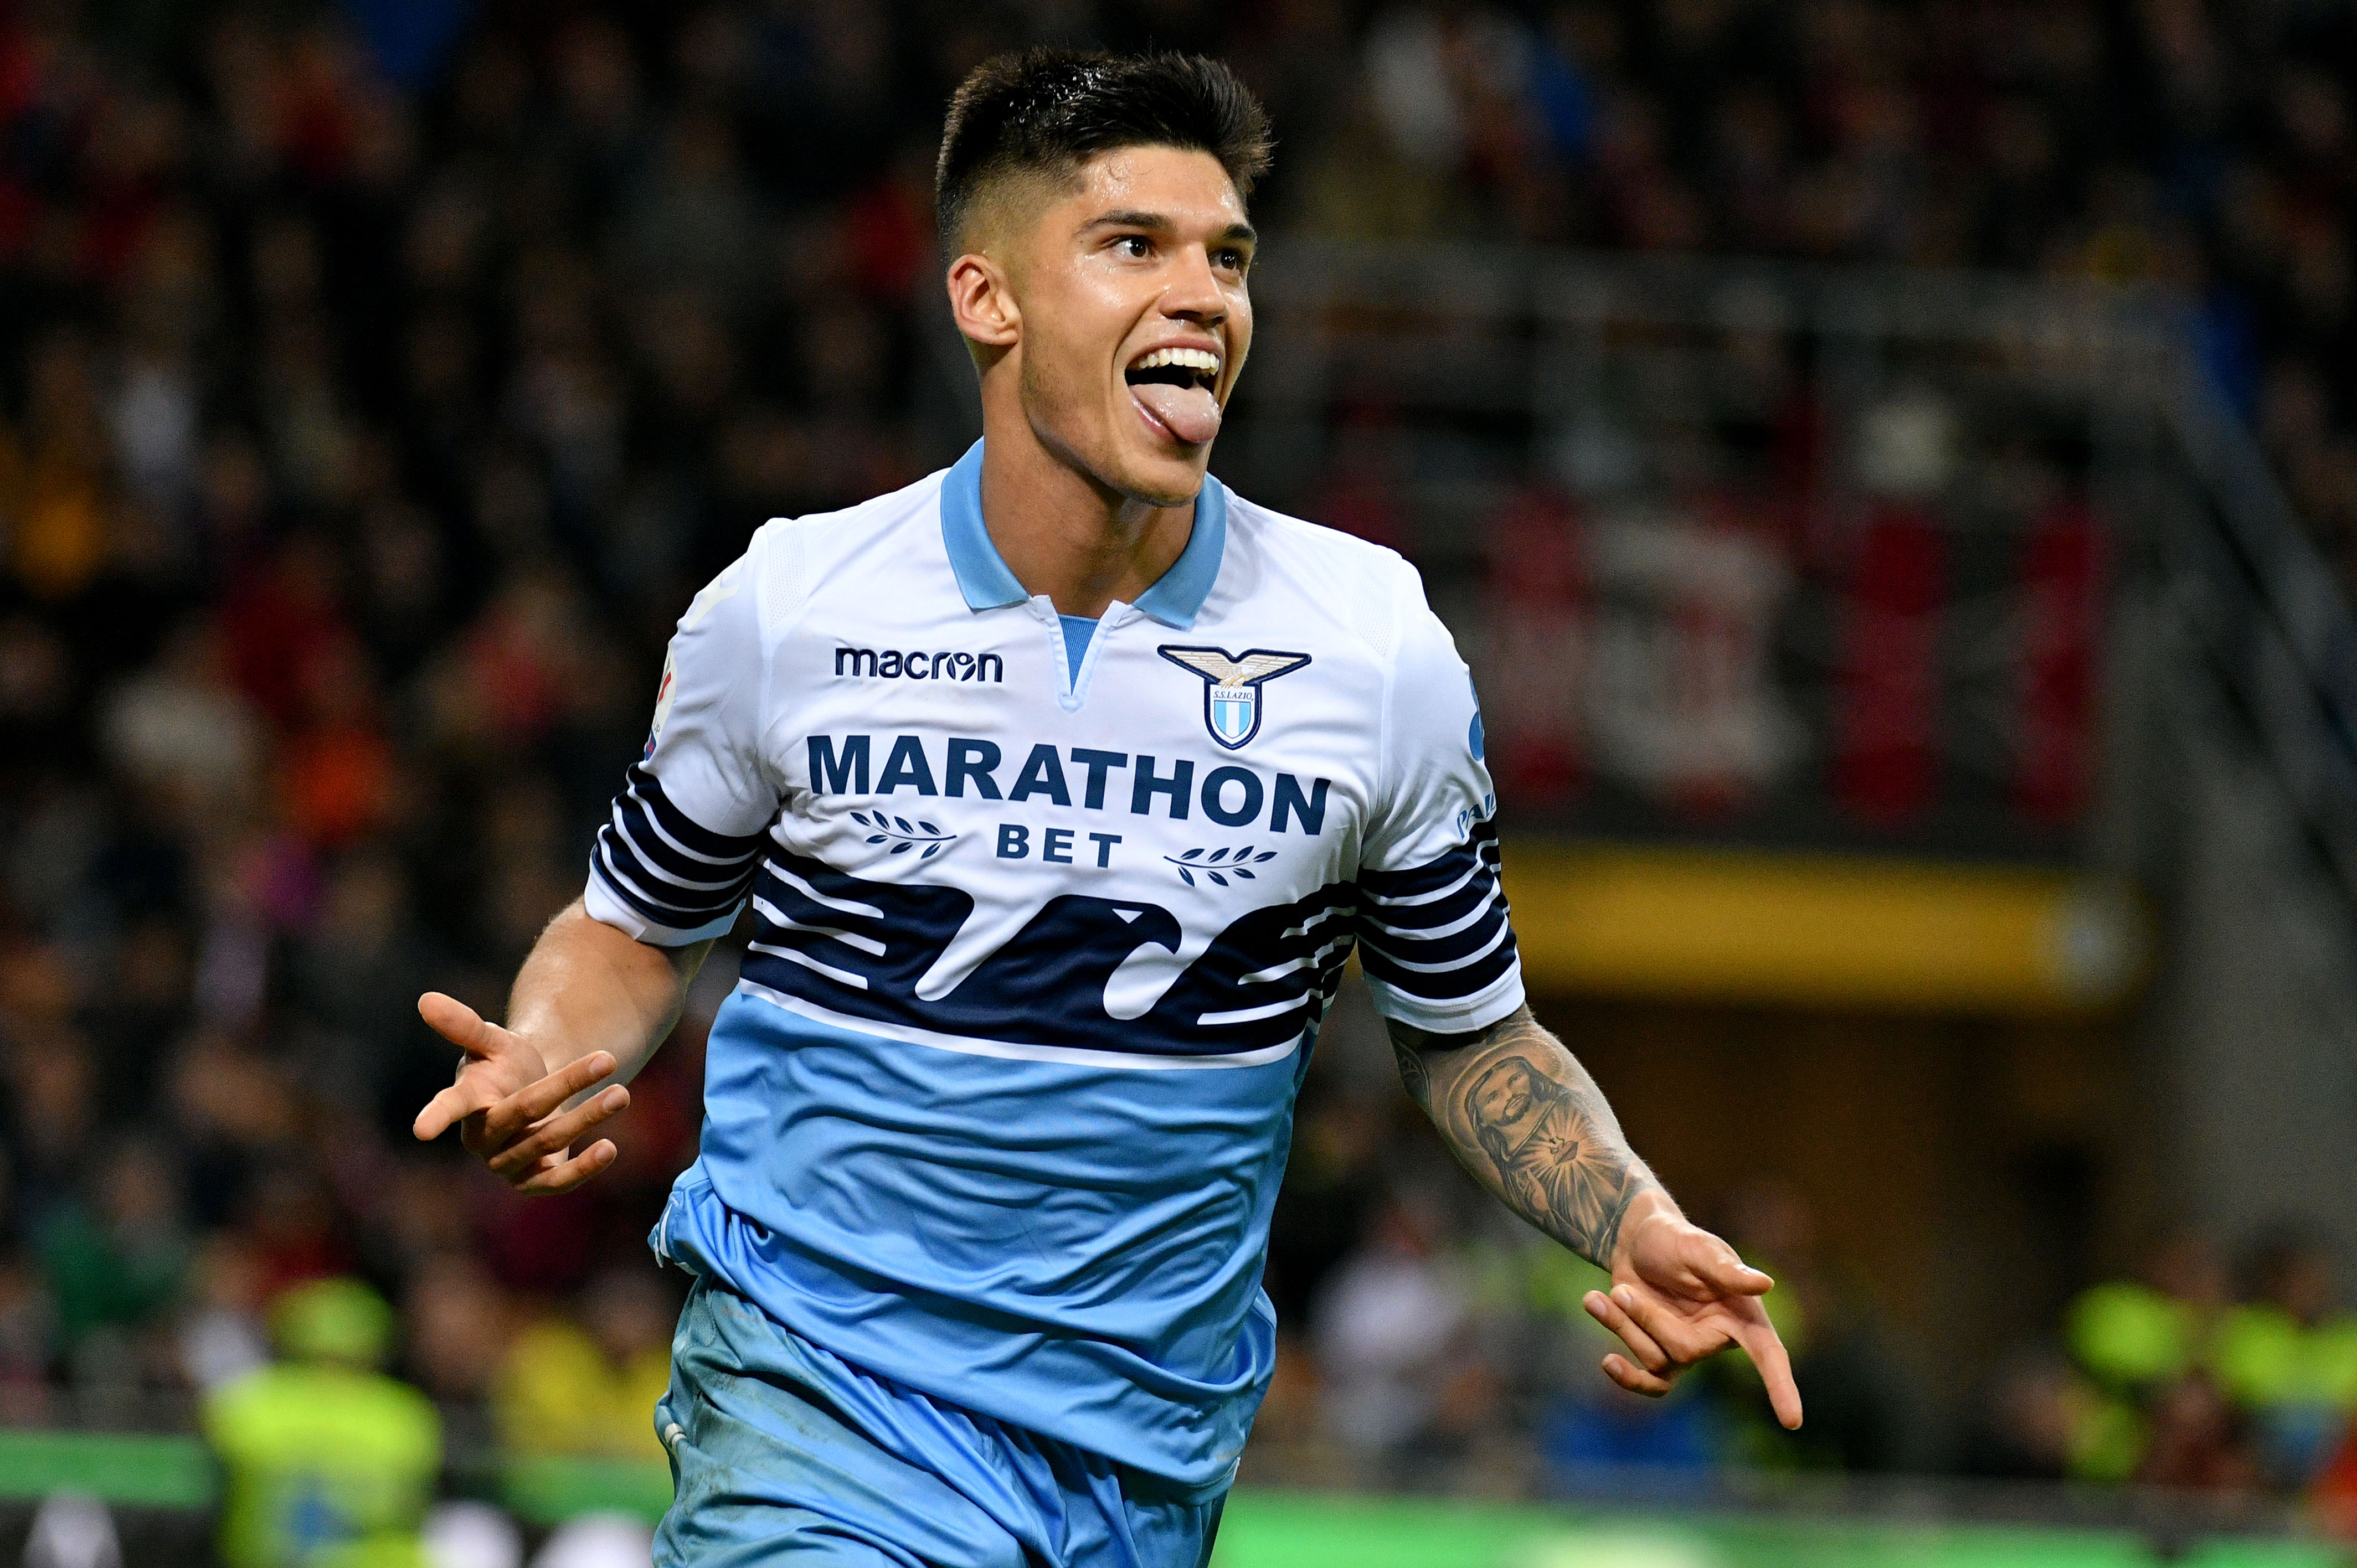 MILAN, ITALY - APRIL 24:  Joaquin Correa of SS Lazio celebrates the opening goal with his team mates during the TIM Cup match between AC Milan and SS Lazio at Stadio Giuseppe Meazza on April 24, 2019 in Milan, Italy.  (Photo by Marco Rosi/Getty Images)